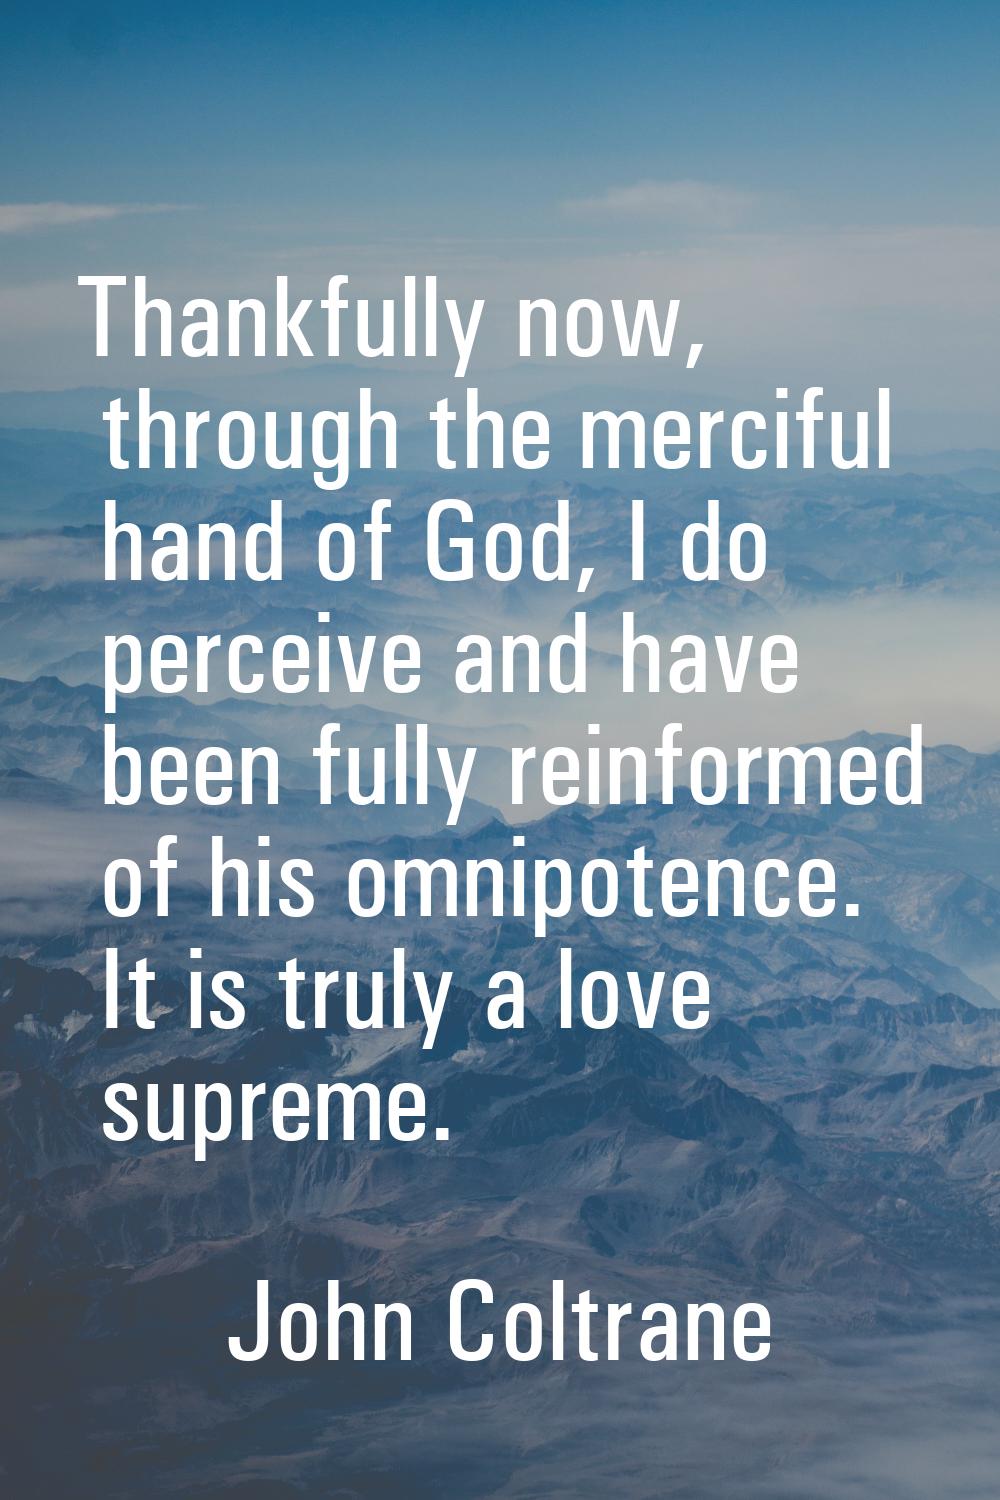 Thankfully now, through the merciful hand of God, I do perceive and have been fully reinformed of h